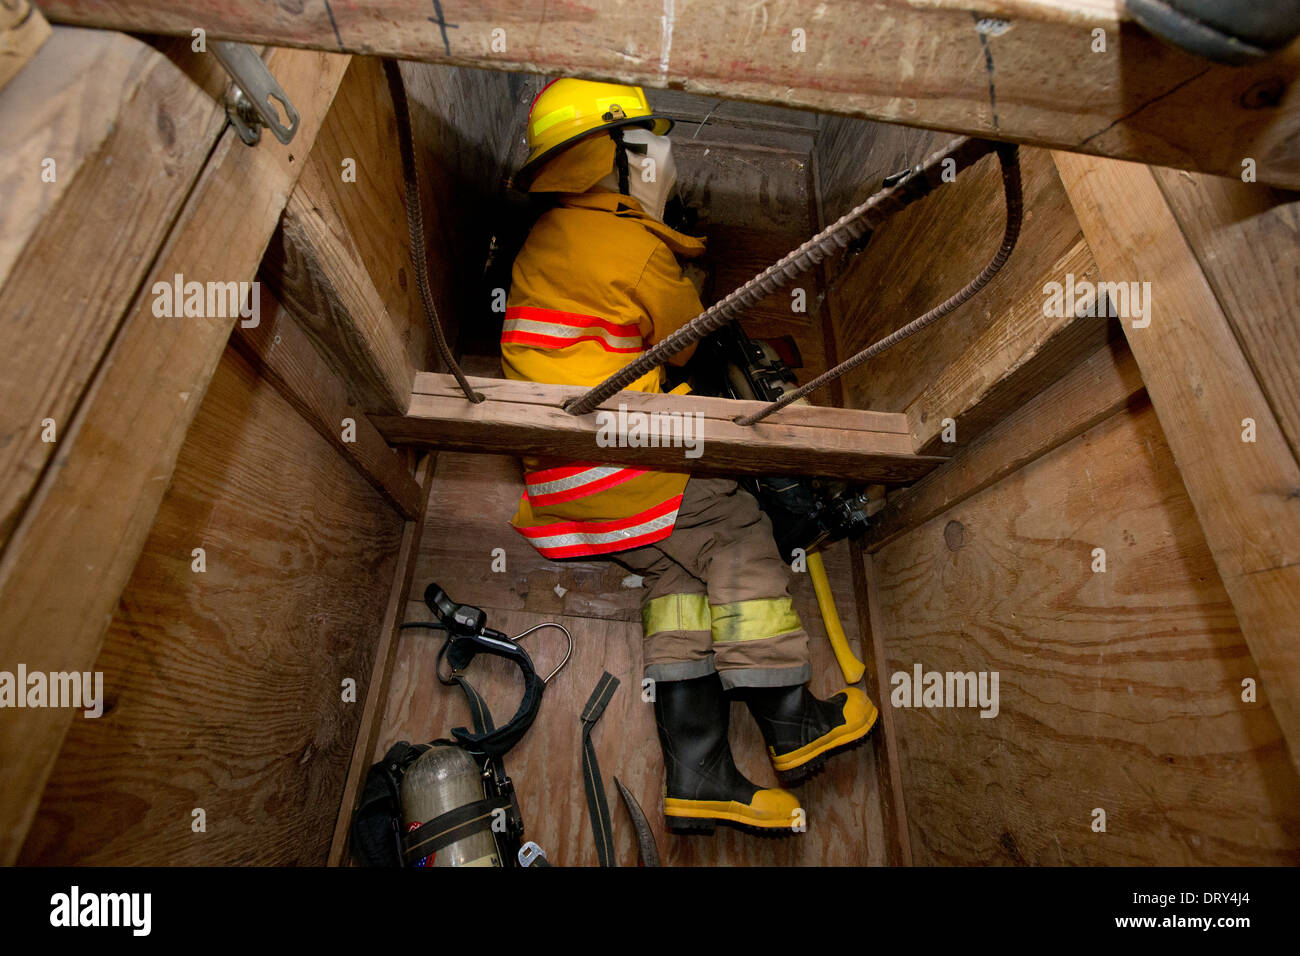 High school fire academy student crawls through obstacle-filled house looking for trapped 'occupants' during training exercise Stock Photo